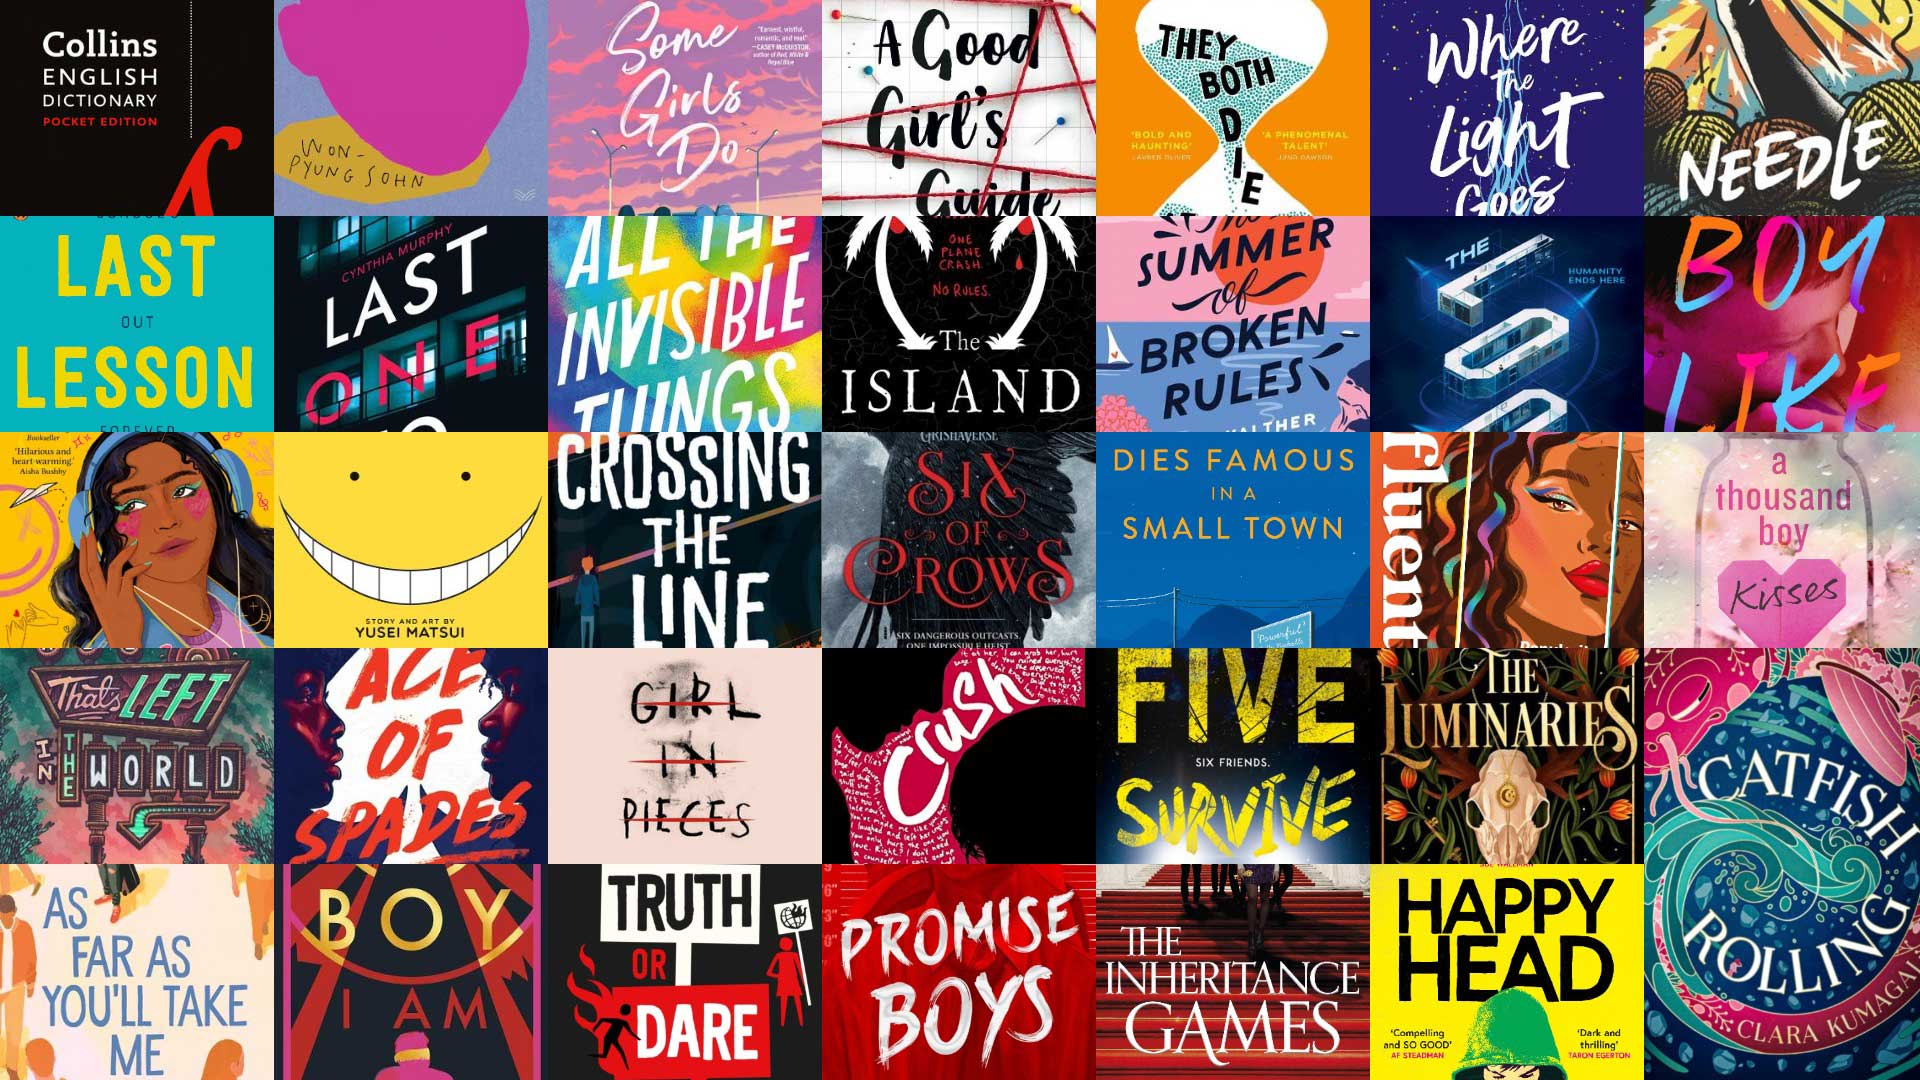 34 books featured in the Booktious reading challenge for KS4.